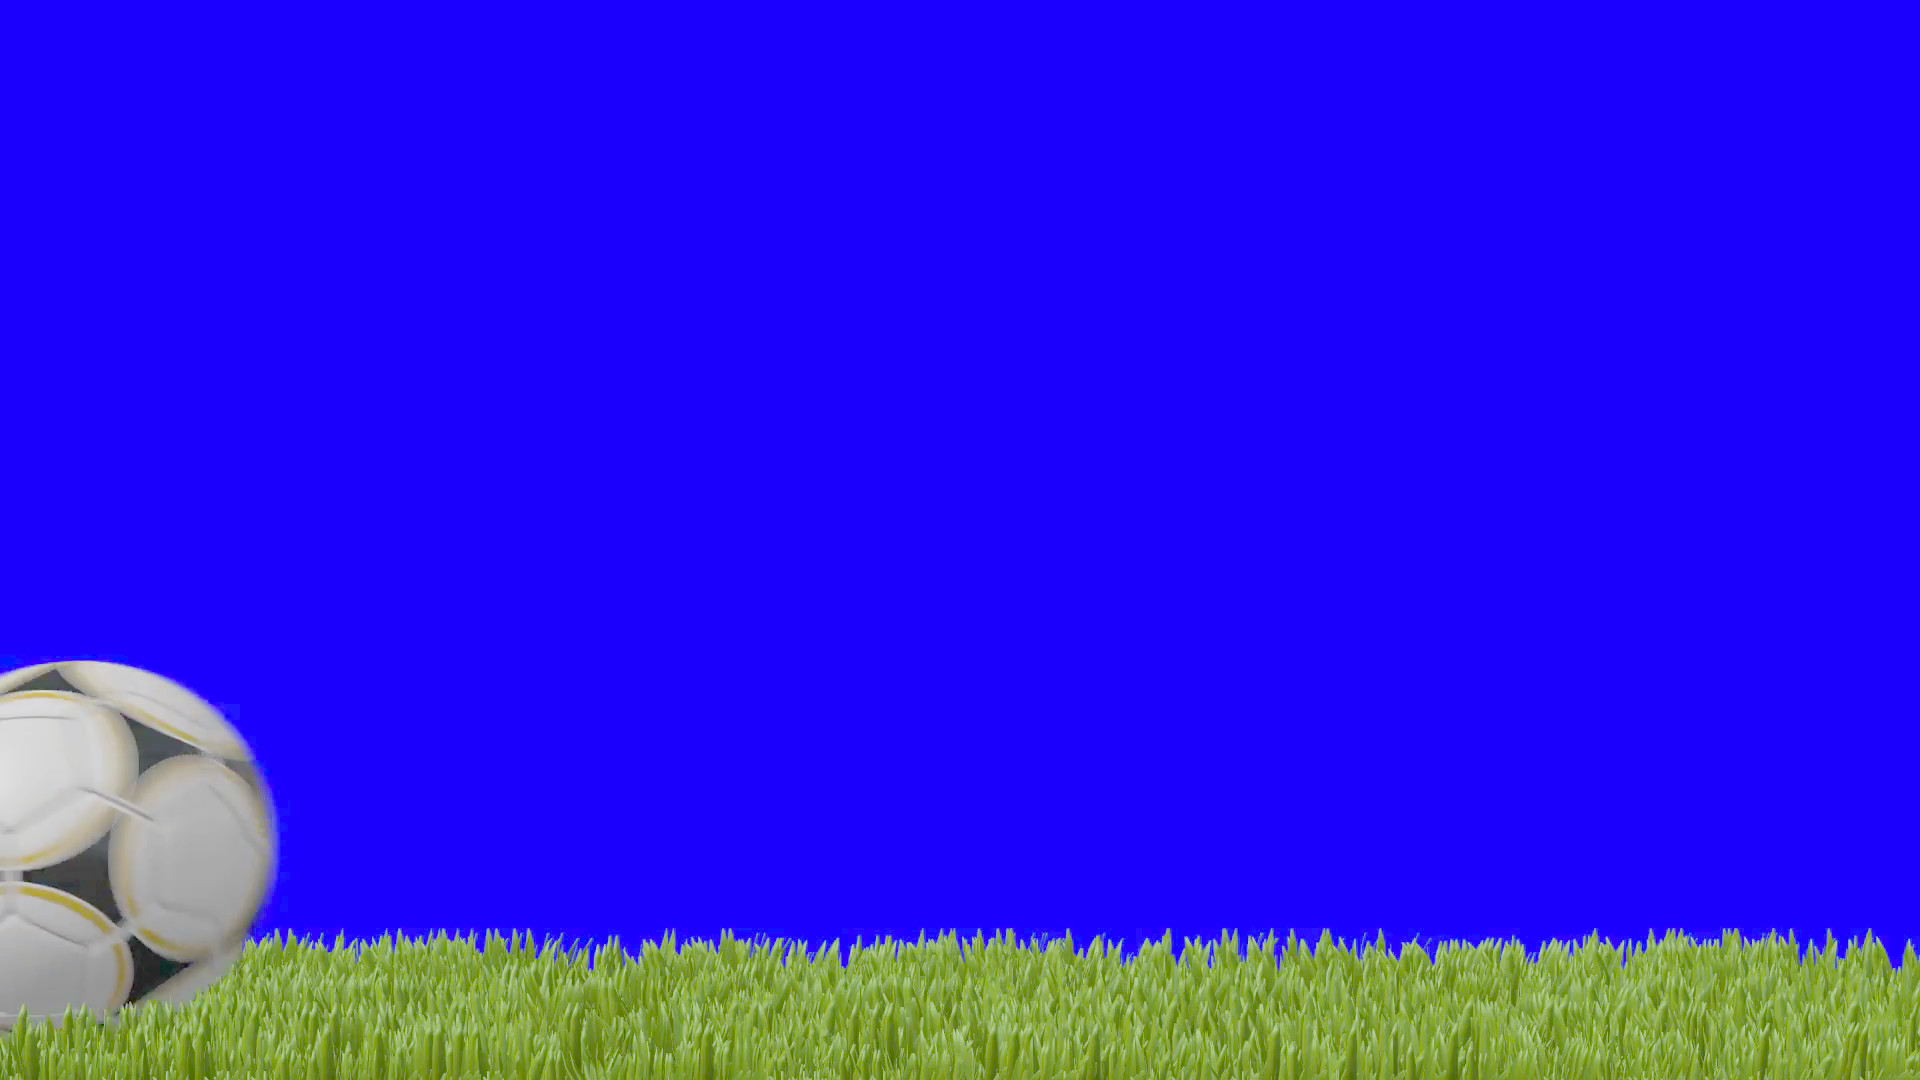 1920x1080 Subscription Library Two Soccer Balls Rolling on the Grass and Crossing the  Screen on a Blue Screen Background